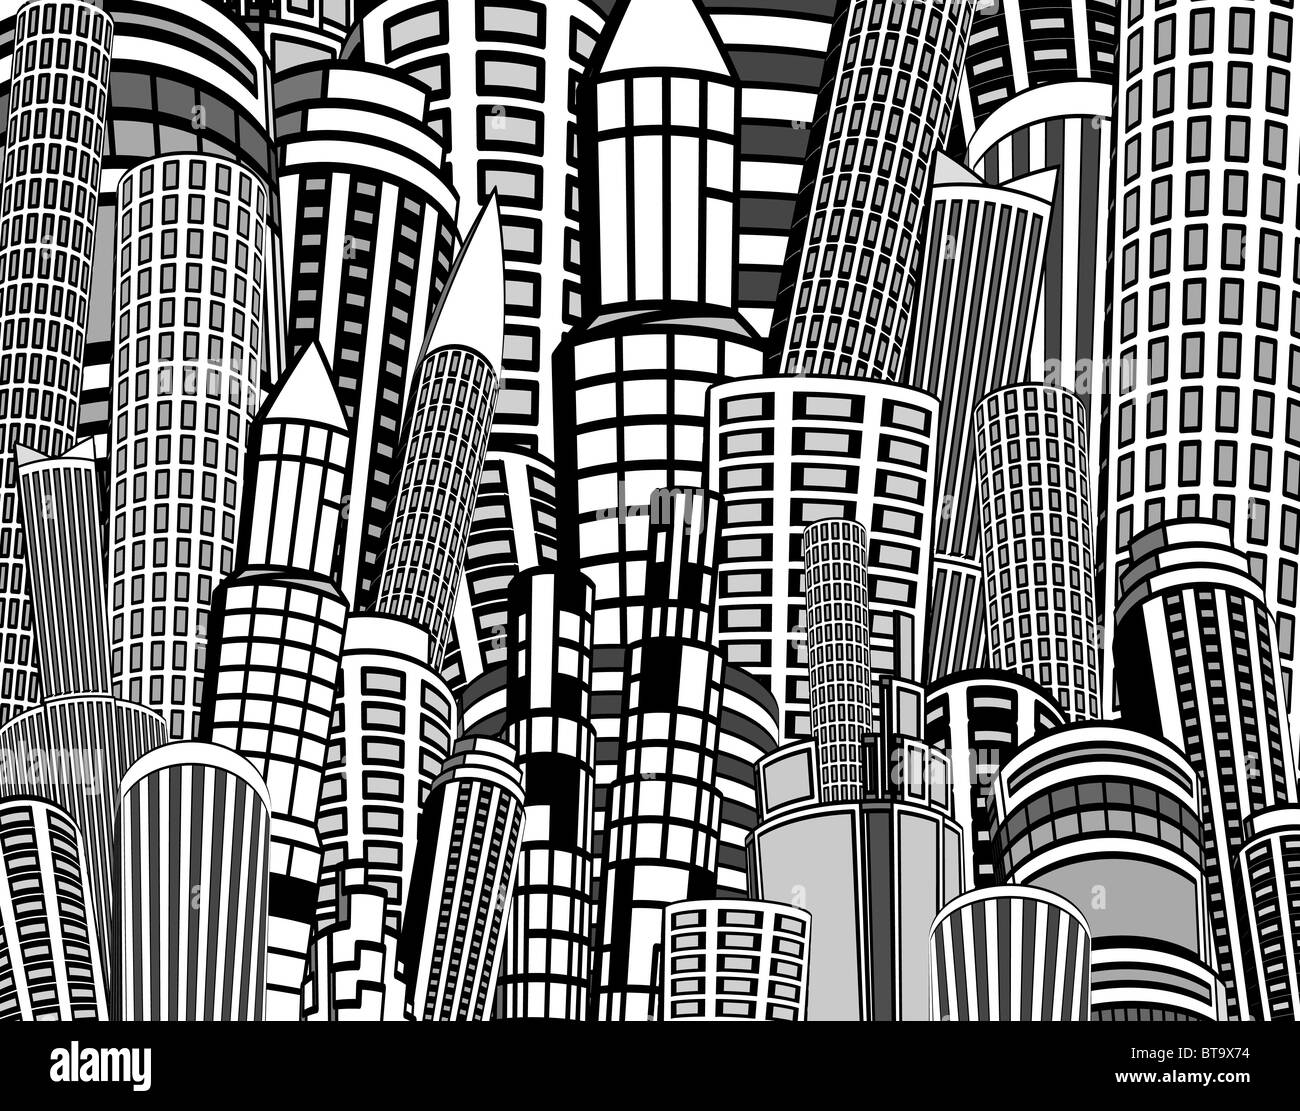 City sketch Images - Search Images on Everypixel